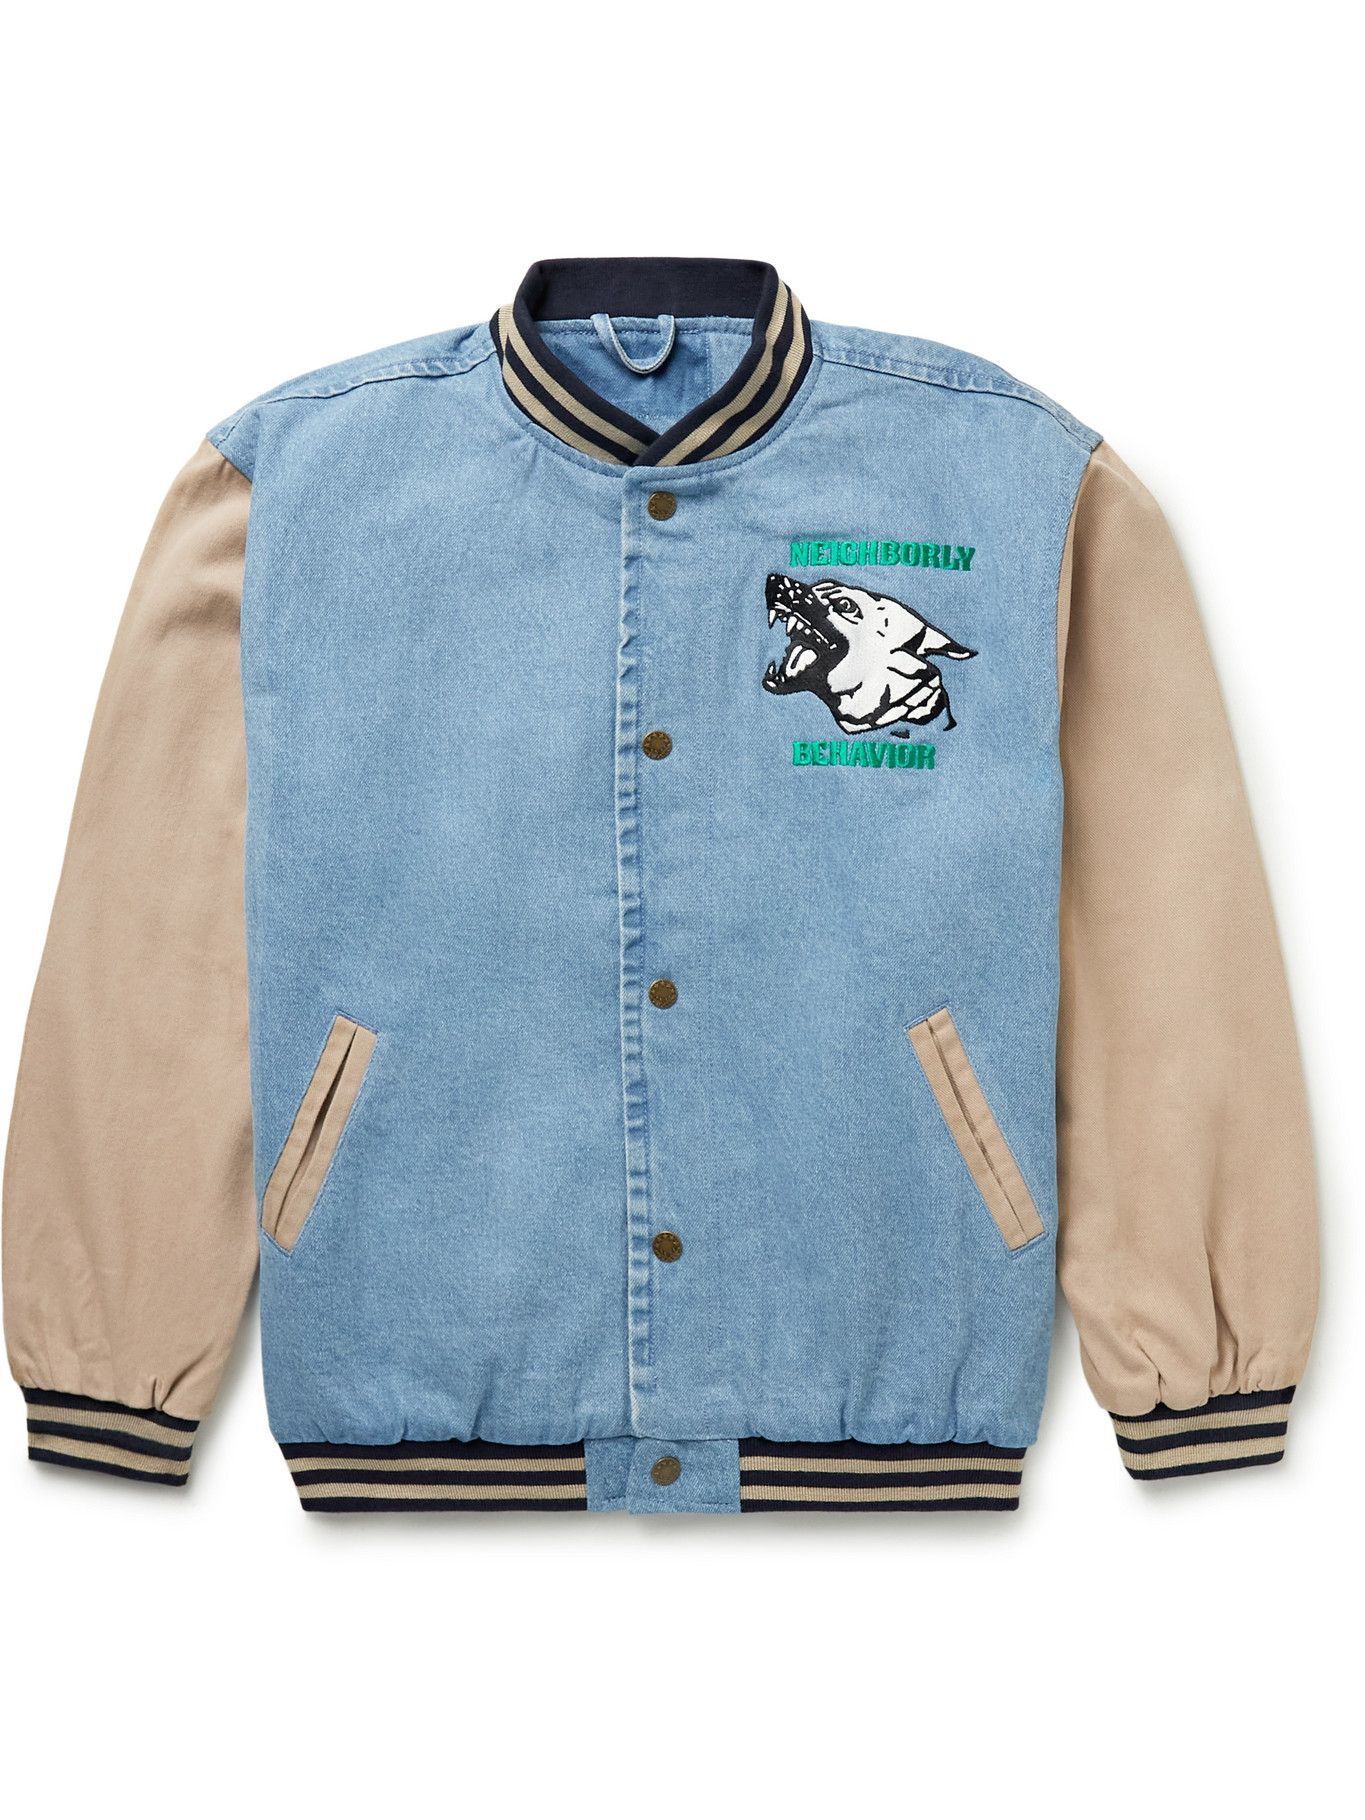 FRIENDS WITH ANIMALS - Logo-Appliquéd Embroidered Denim and Drill Varsity  Jacket - Blue